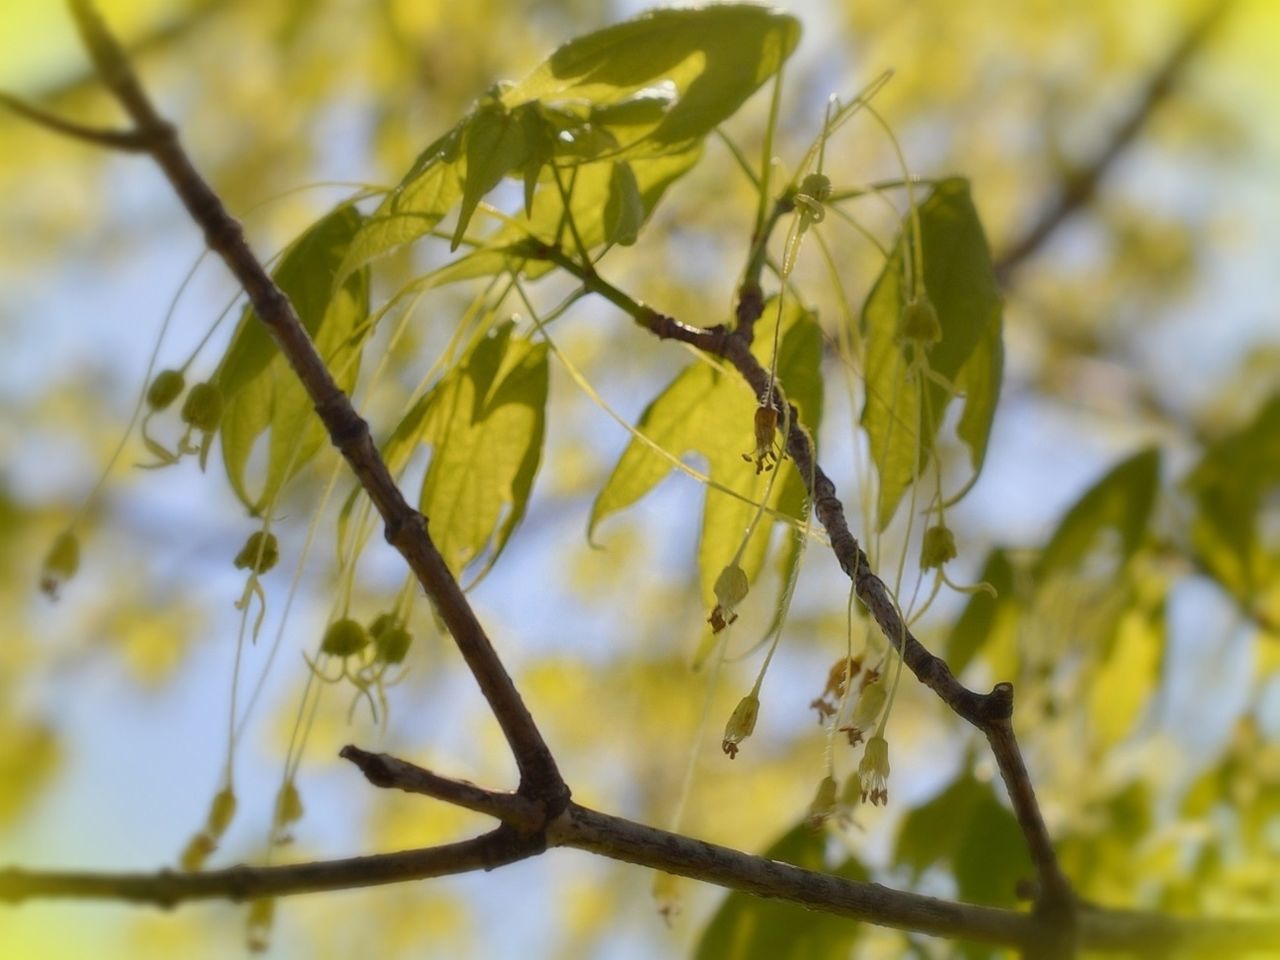 branch, focus on foreground, leaf, growth, close-up, tree, nature, twig, selective focus, beauty in nature, plant, outdoors, day, low angle view, no people, green color, tranquility, freshness, yellow, leaves